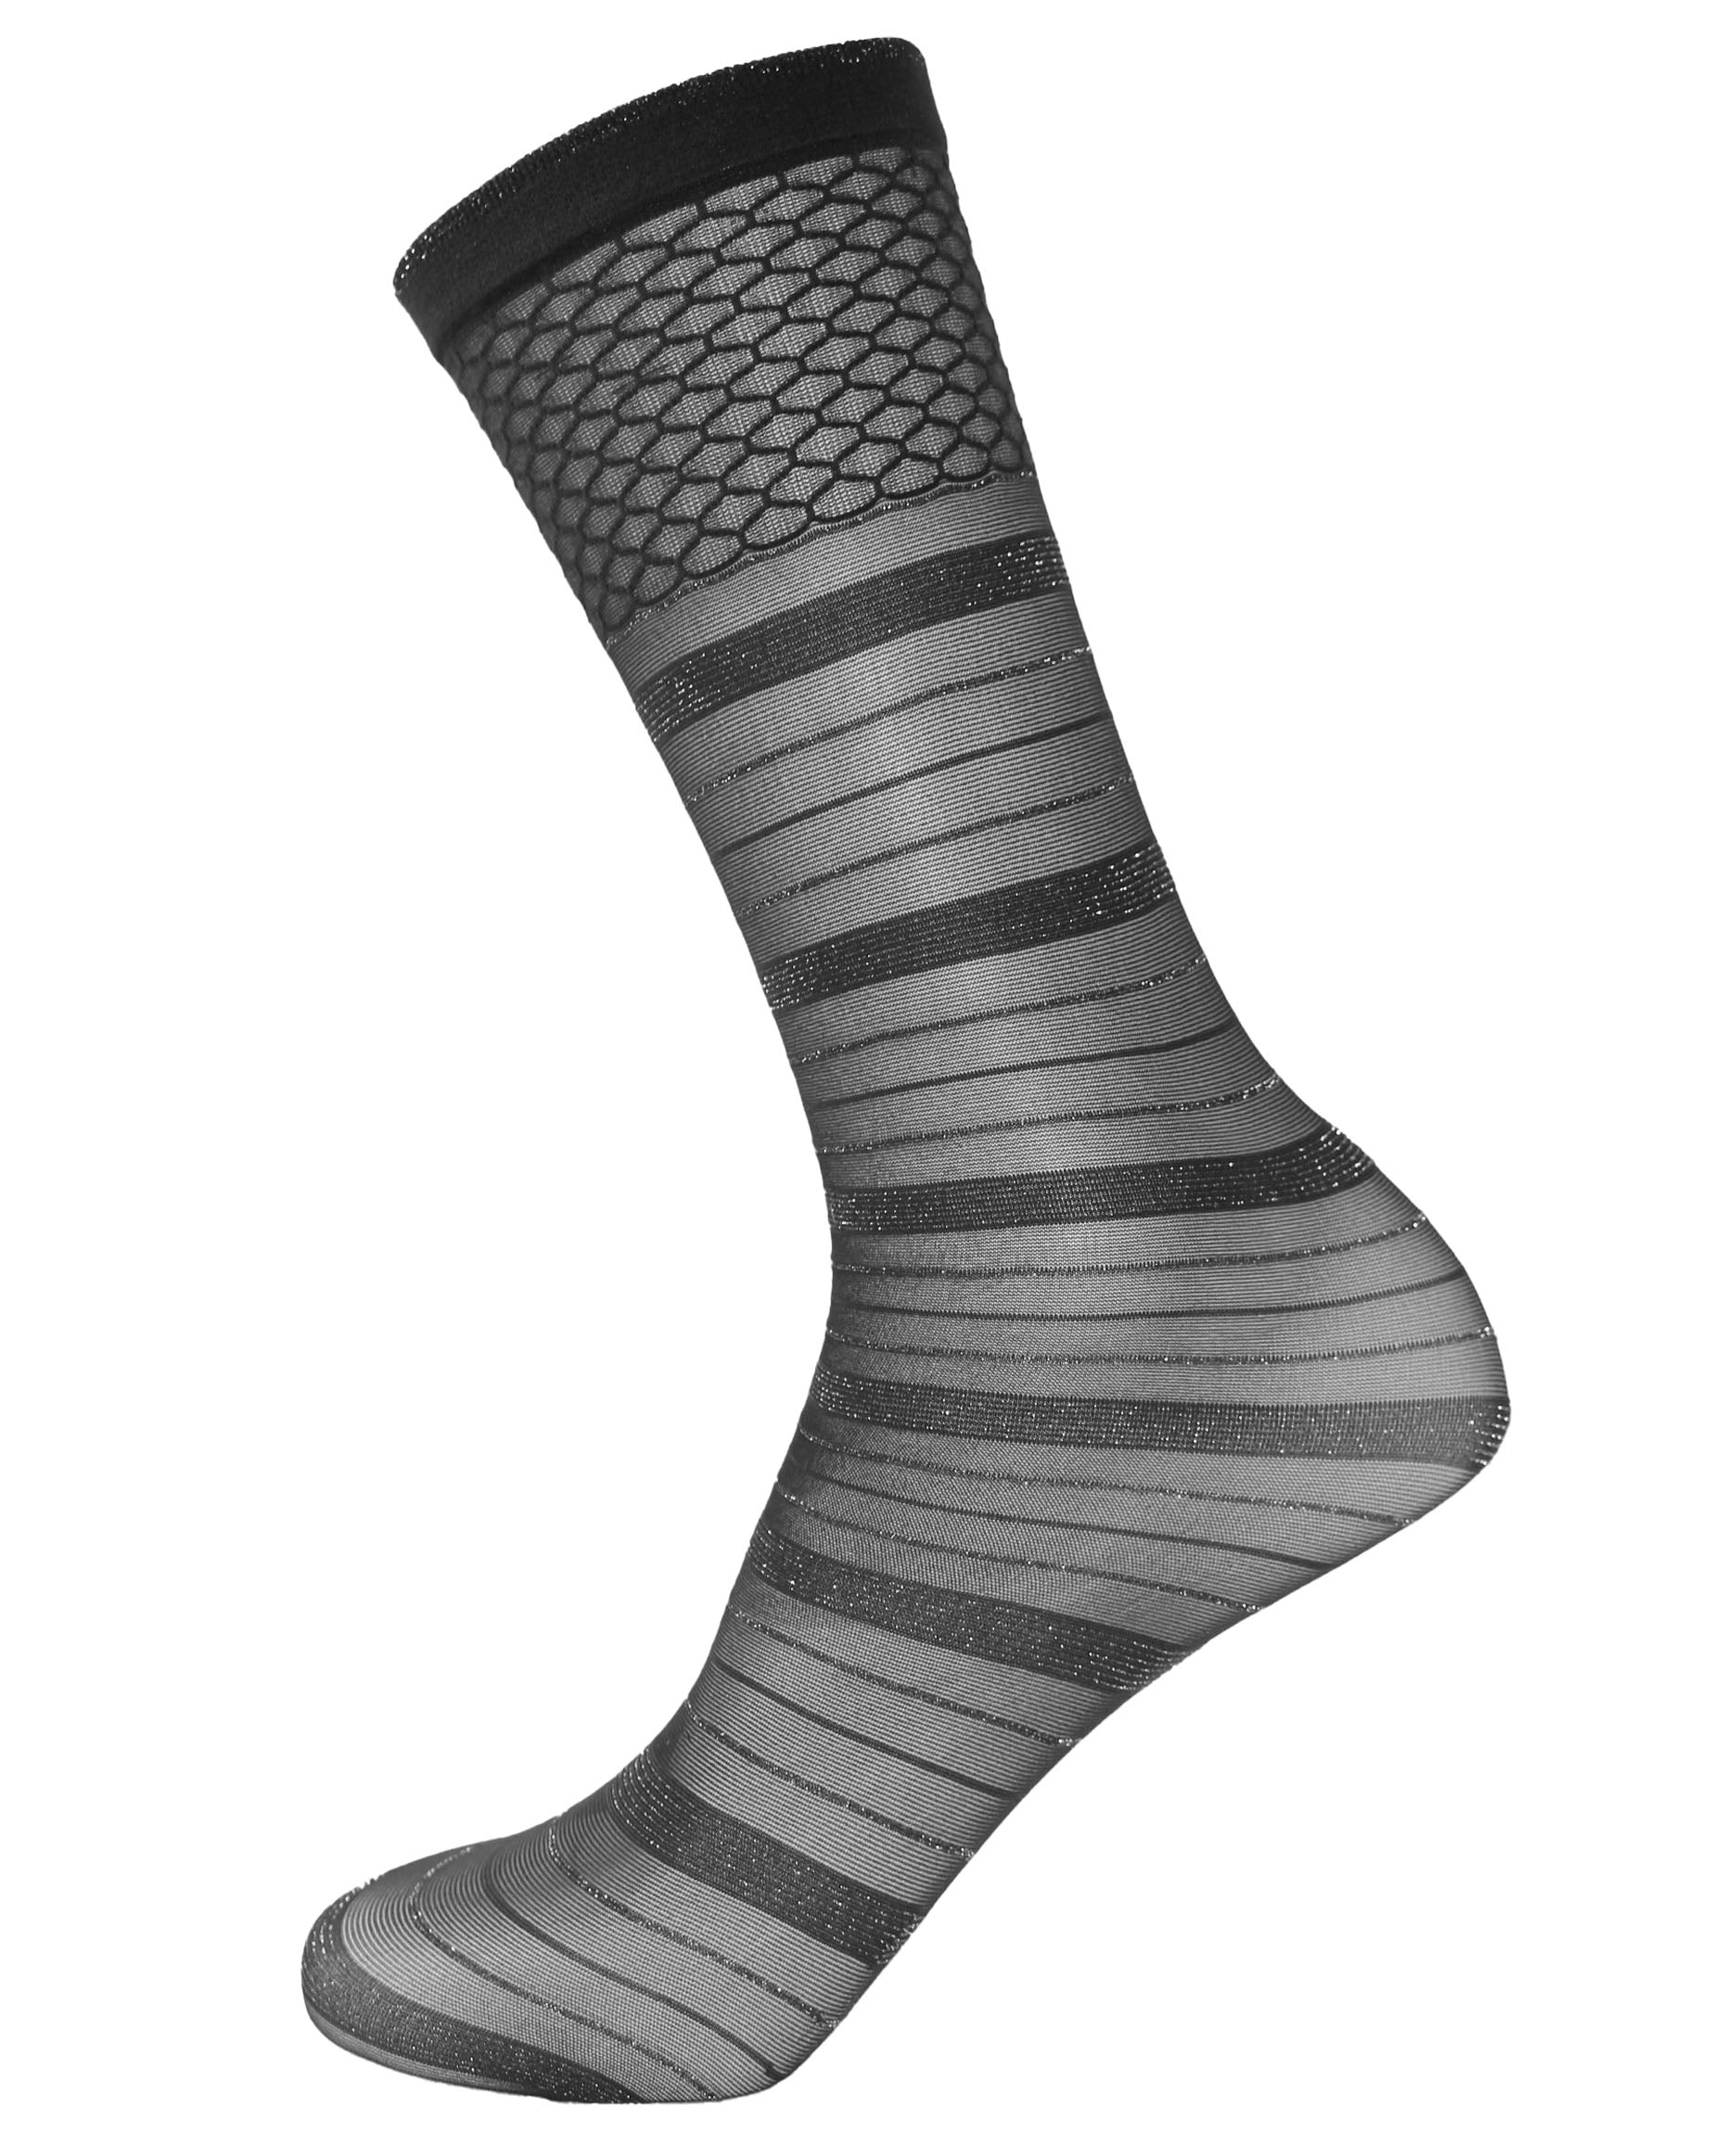 SiSi Lines Calzino - Sheer black fashion ankle socks with a horizontal striped pattern with sparkly silver lamé and deep honeycomb patterned cuff.